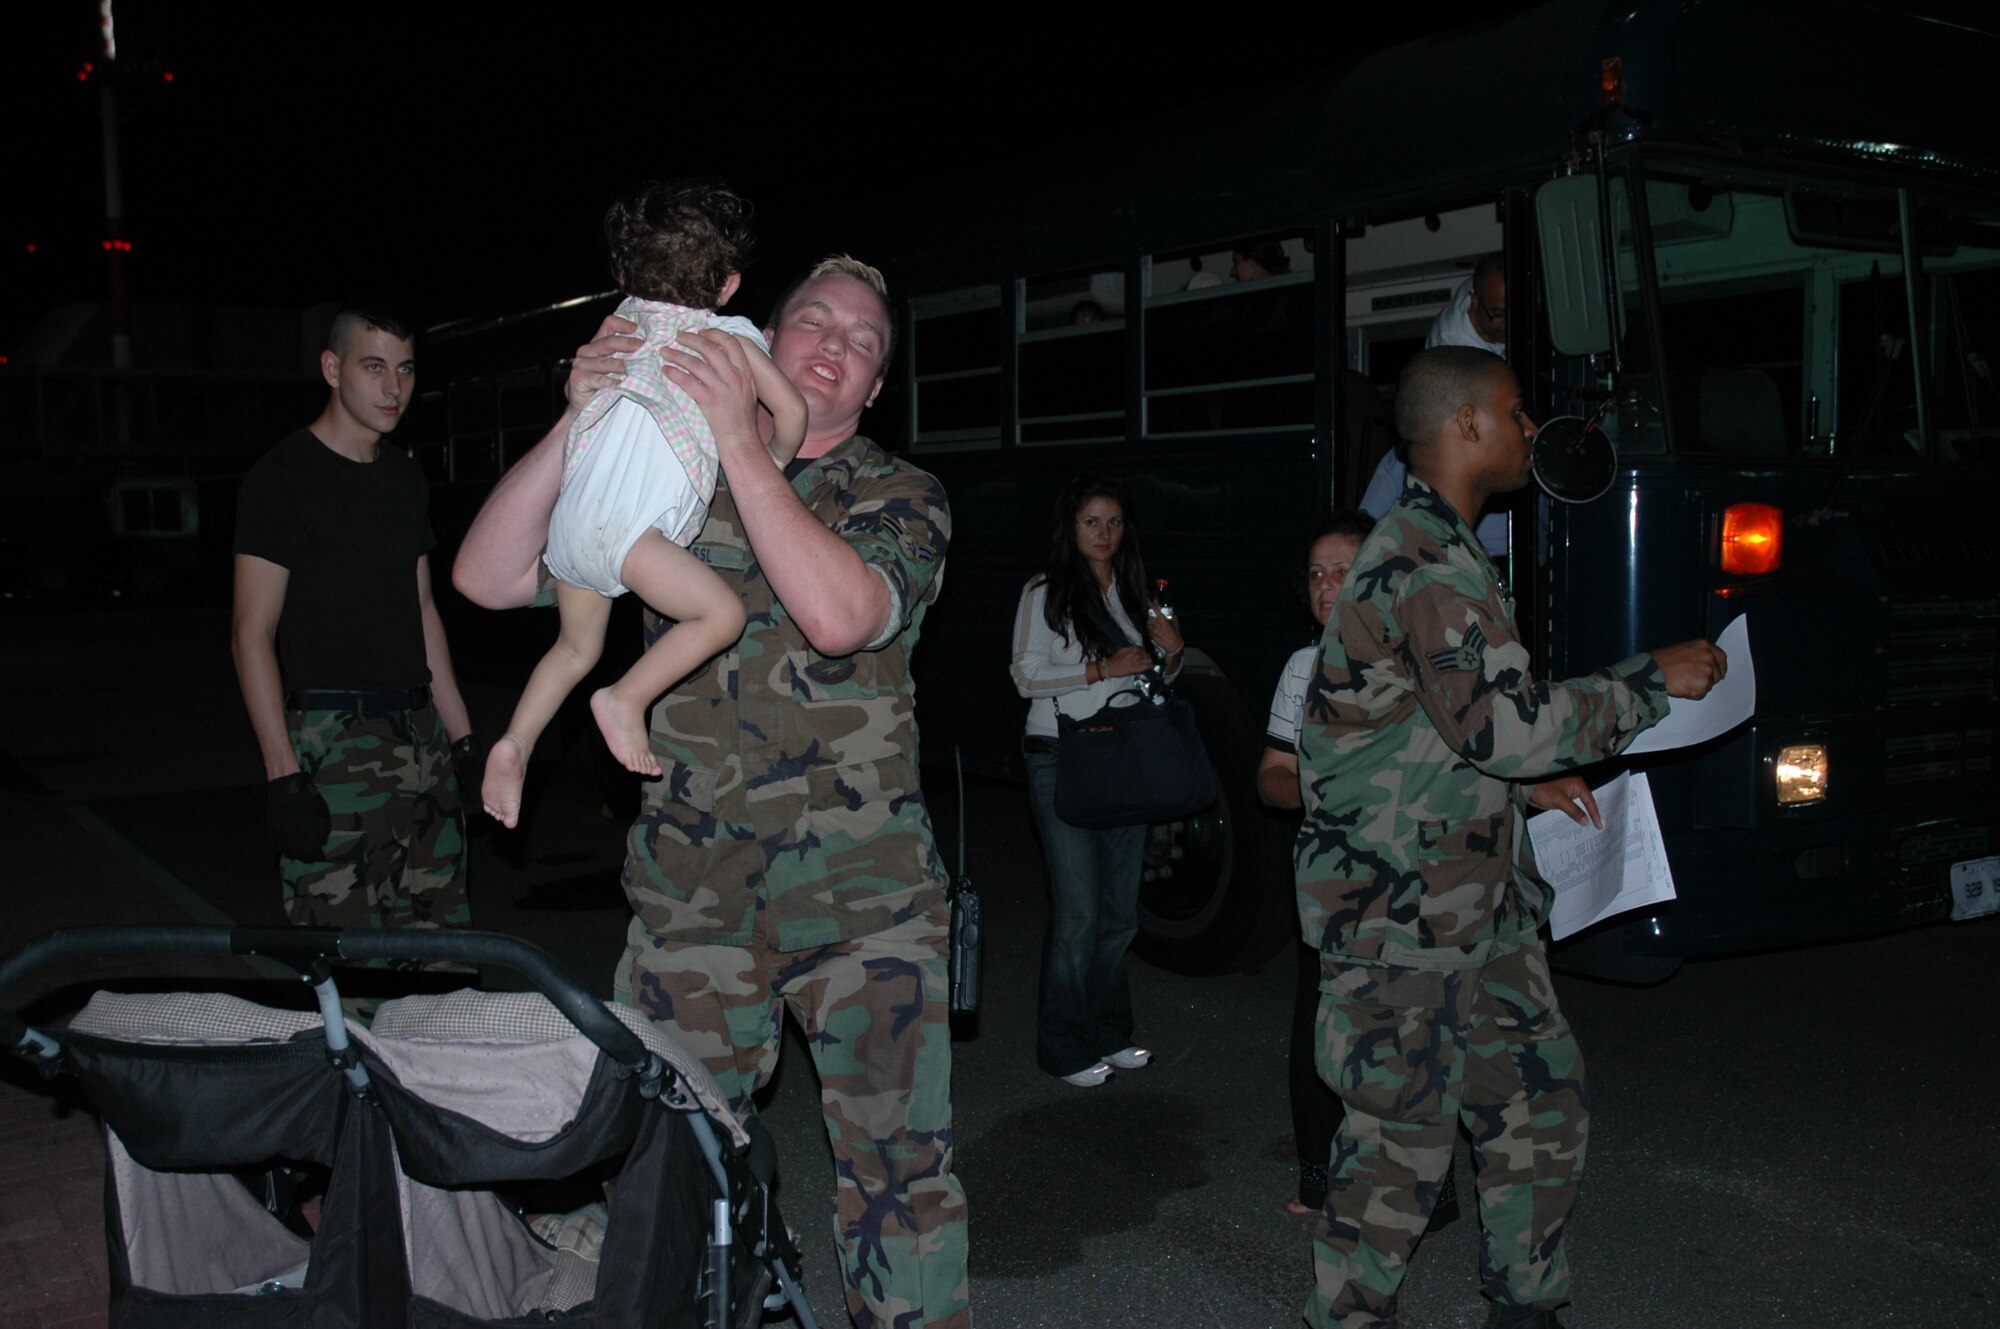 RAMSTEIN AB, Germany -- Airman 1st Class Brendan Fassl, 723rd Air Mobility Squadron Passenger Services, picks up an infant to carry onto a bus to transport American citizens displaced from Lebanon to a C-17 waiting to return them to the United States July 23.
(Photo by SMSgt Stefan Alford)